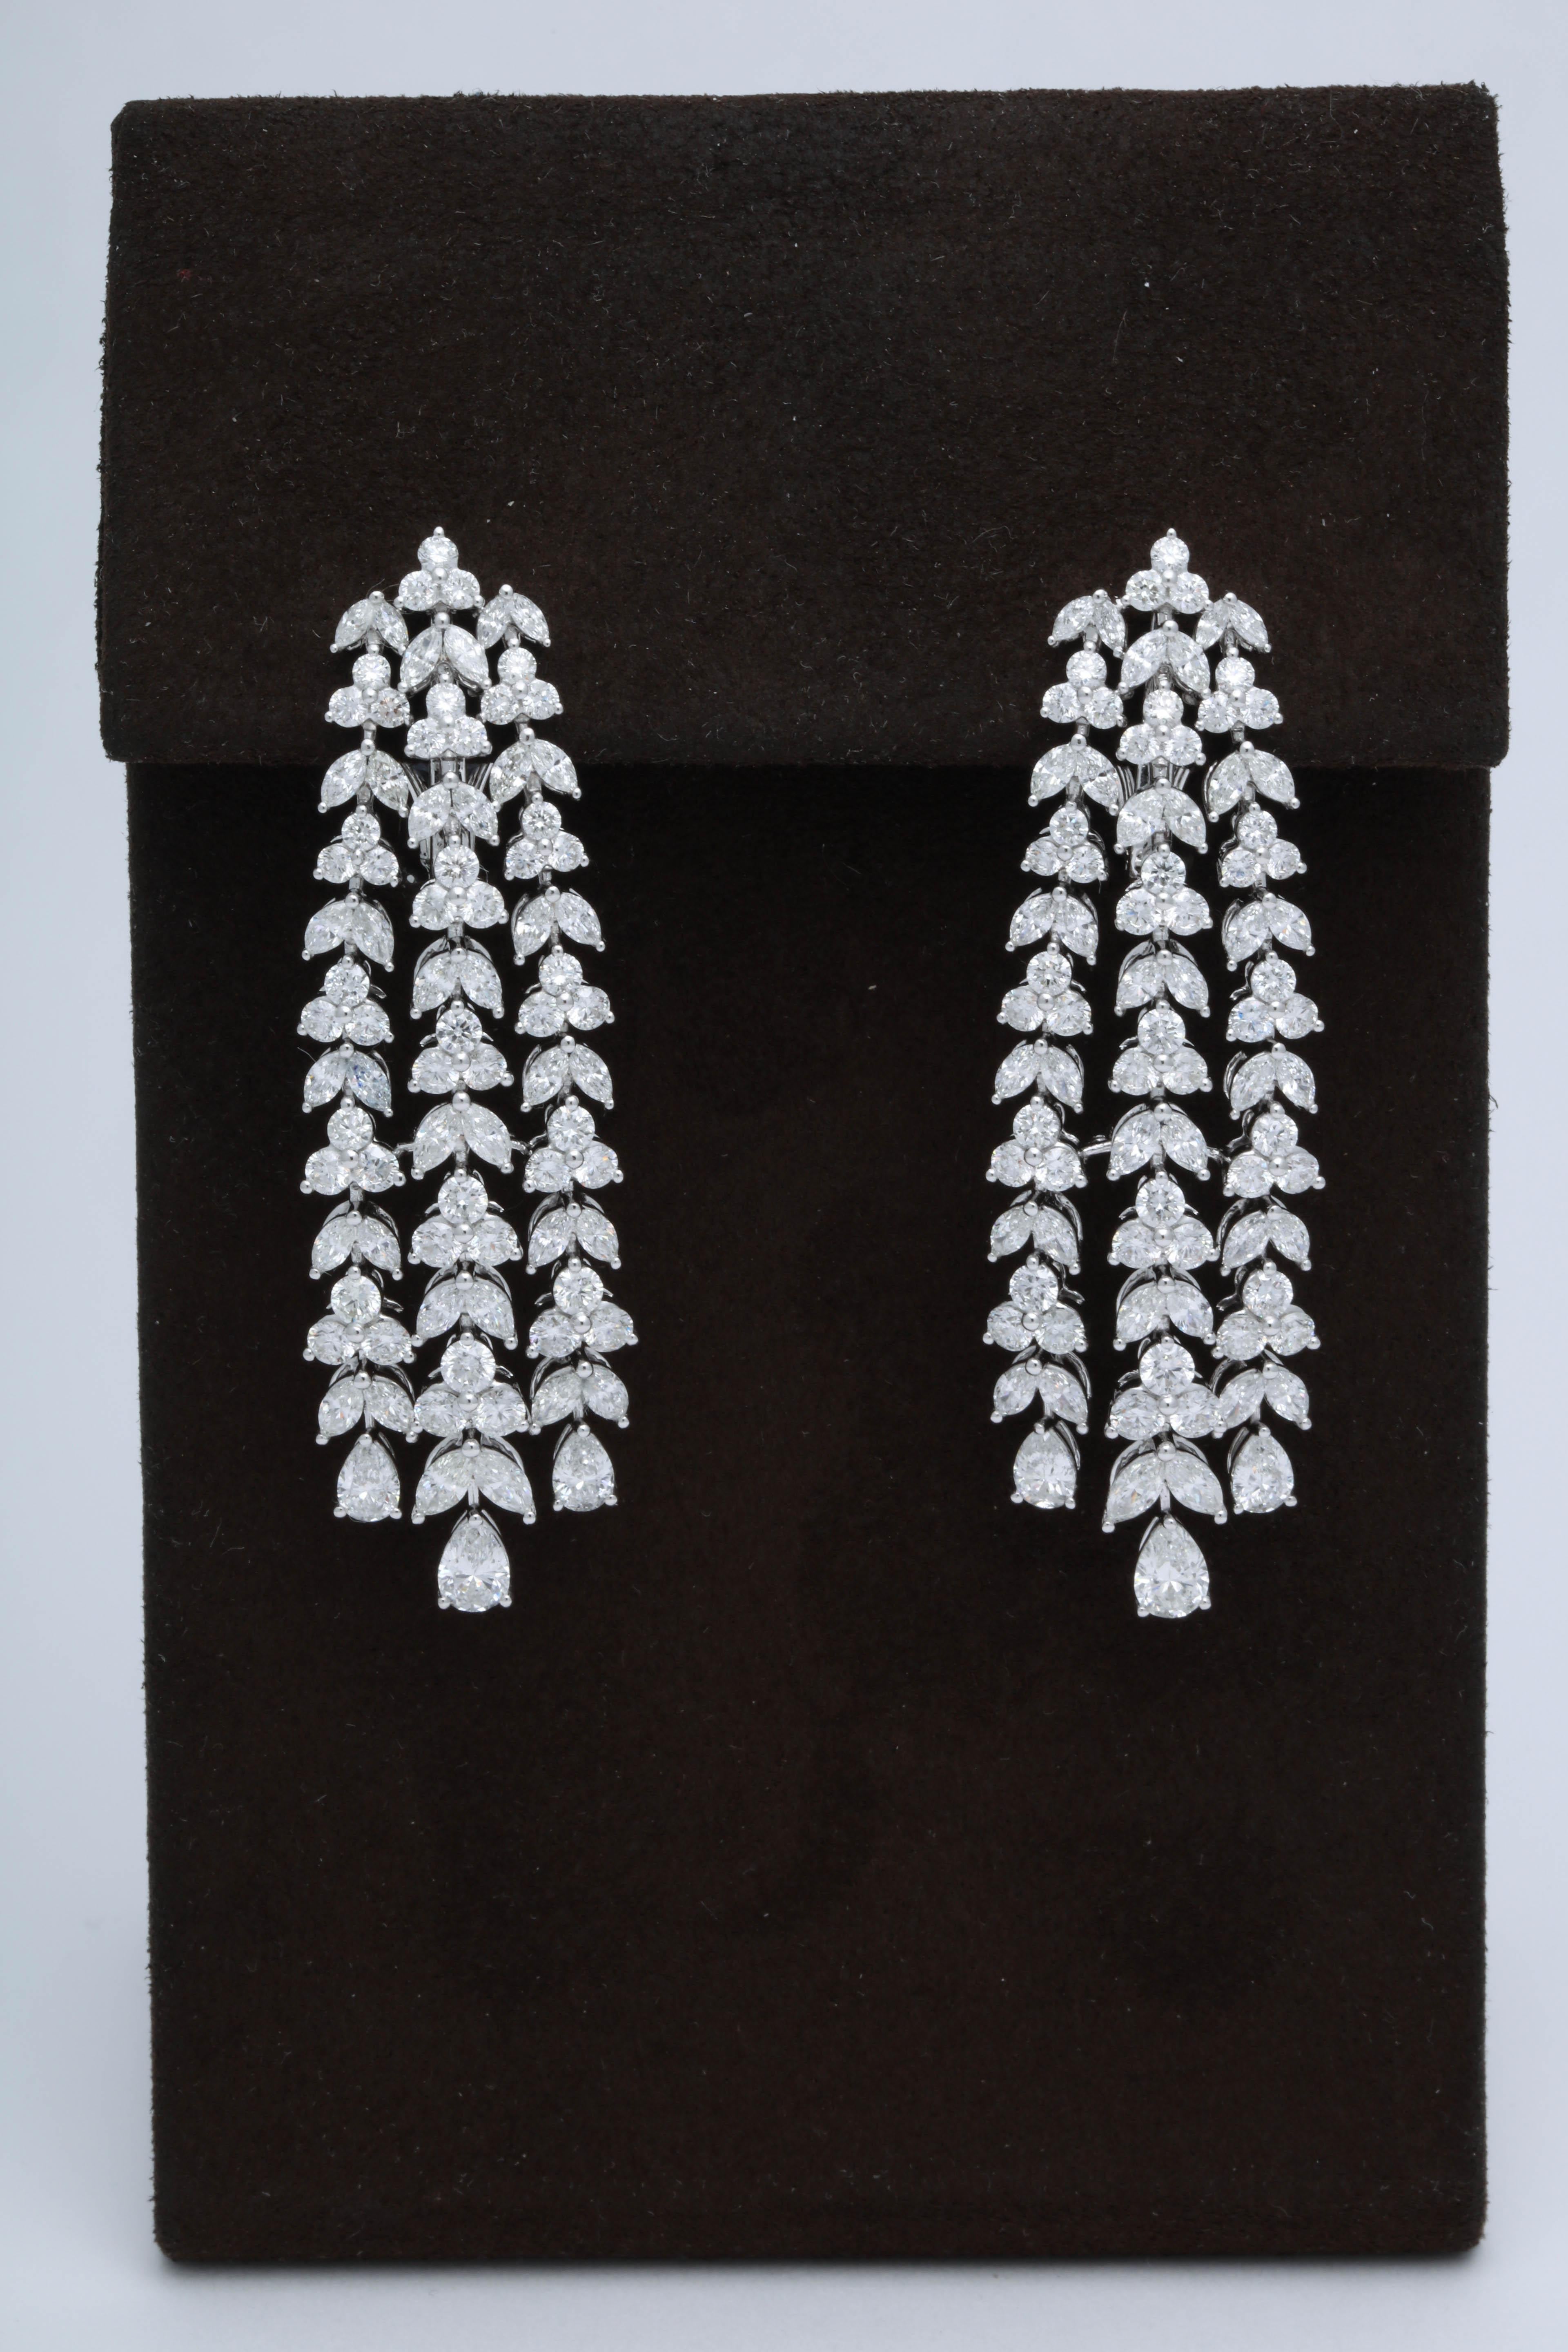 
An impressive dangle earring, full of SPARKLE.

10.52 carats of round, marquise and pear shaped white diamonds set in 18k white gold. 

Approximately 2.25 inches from its highest to lowest point, about half an inch wide. 

A fabulous earring with a